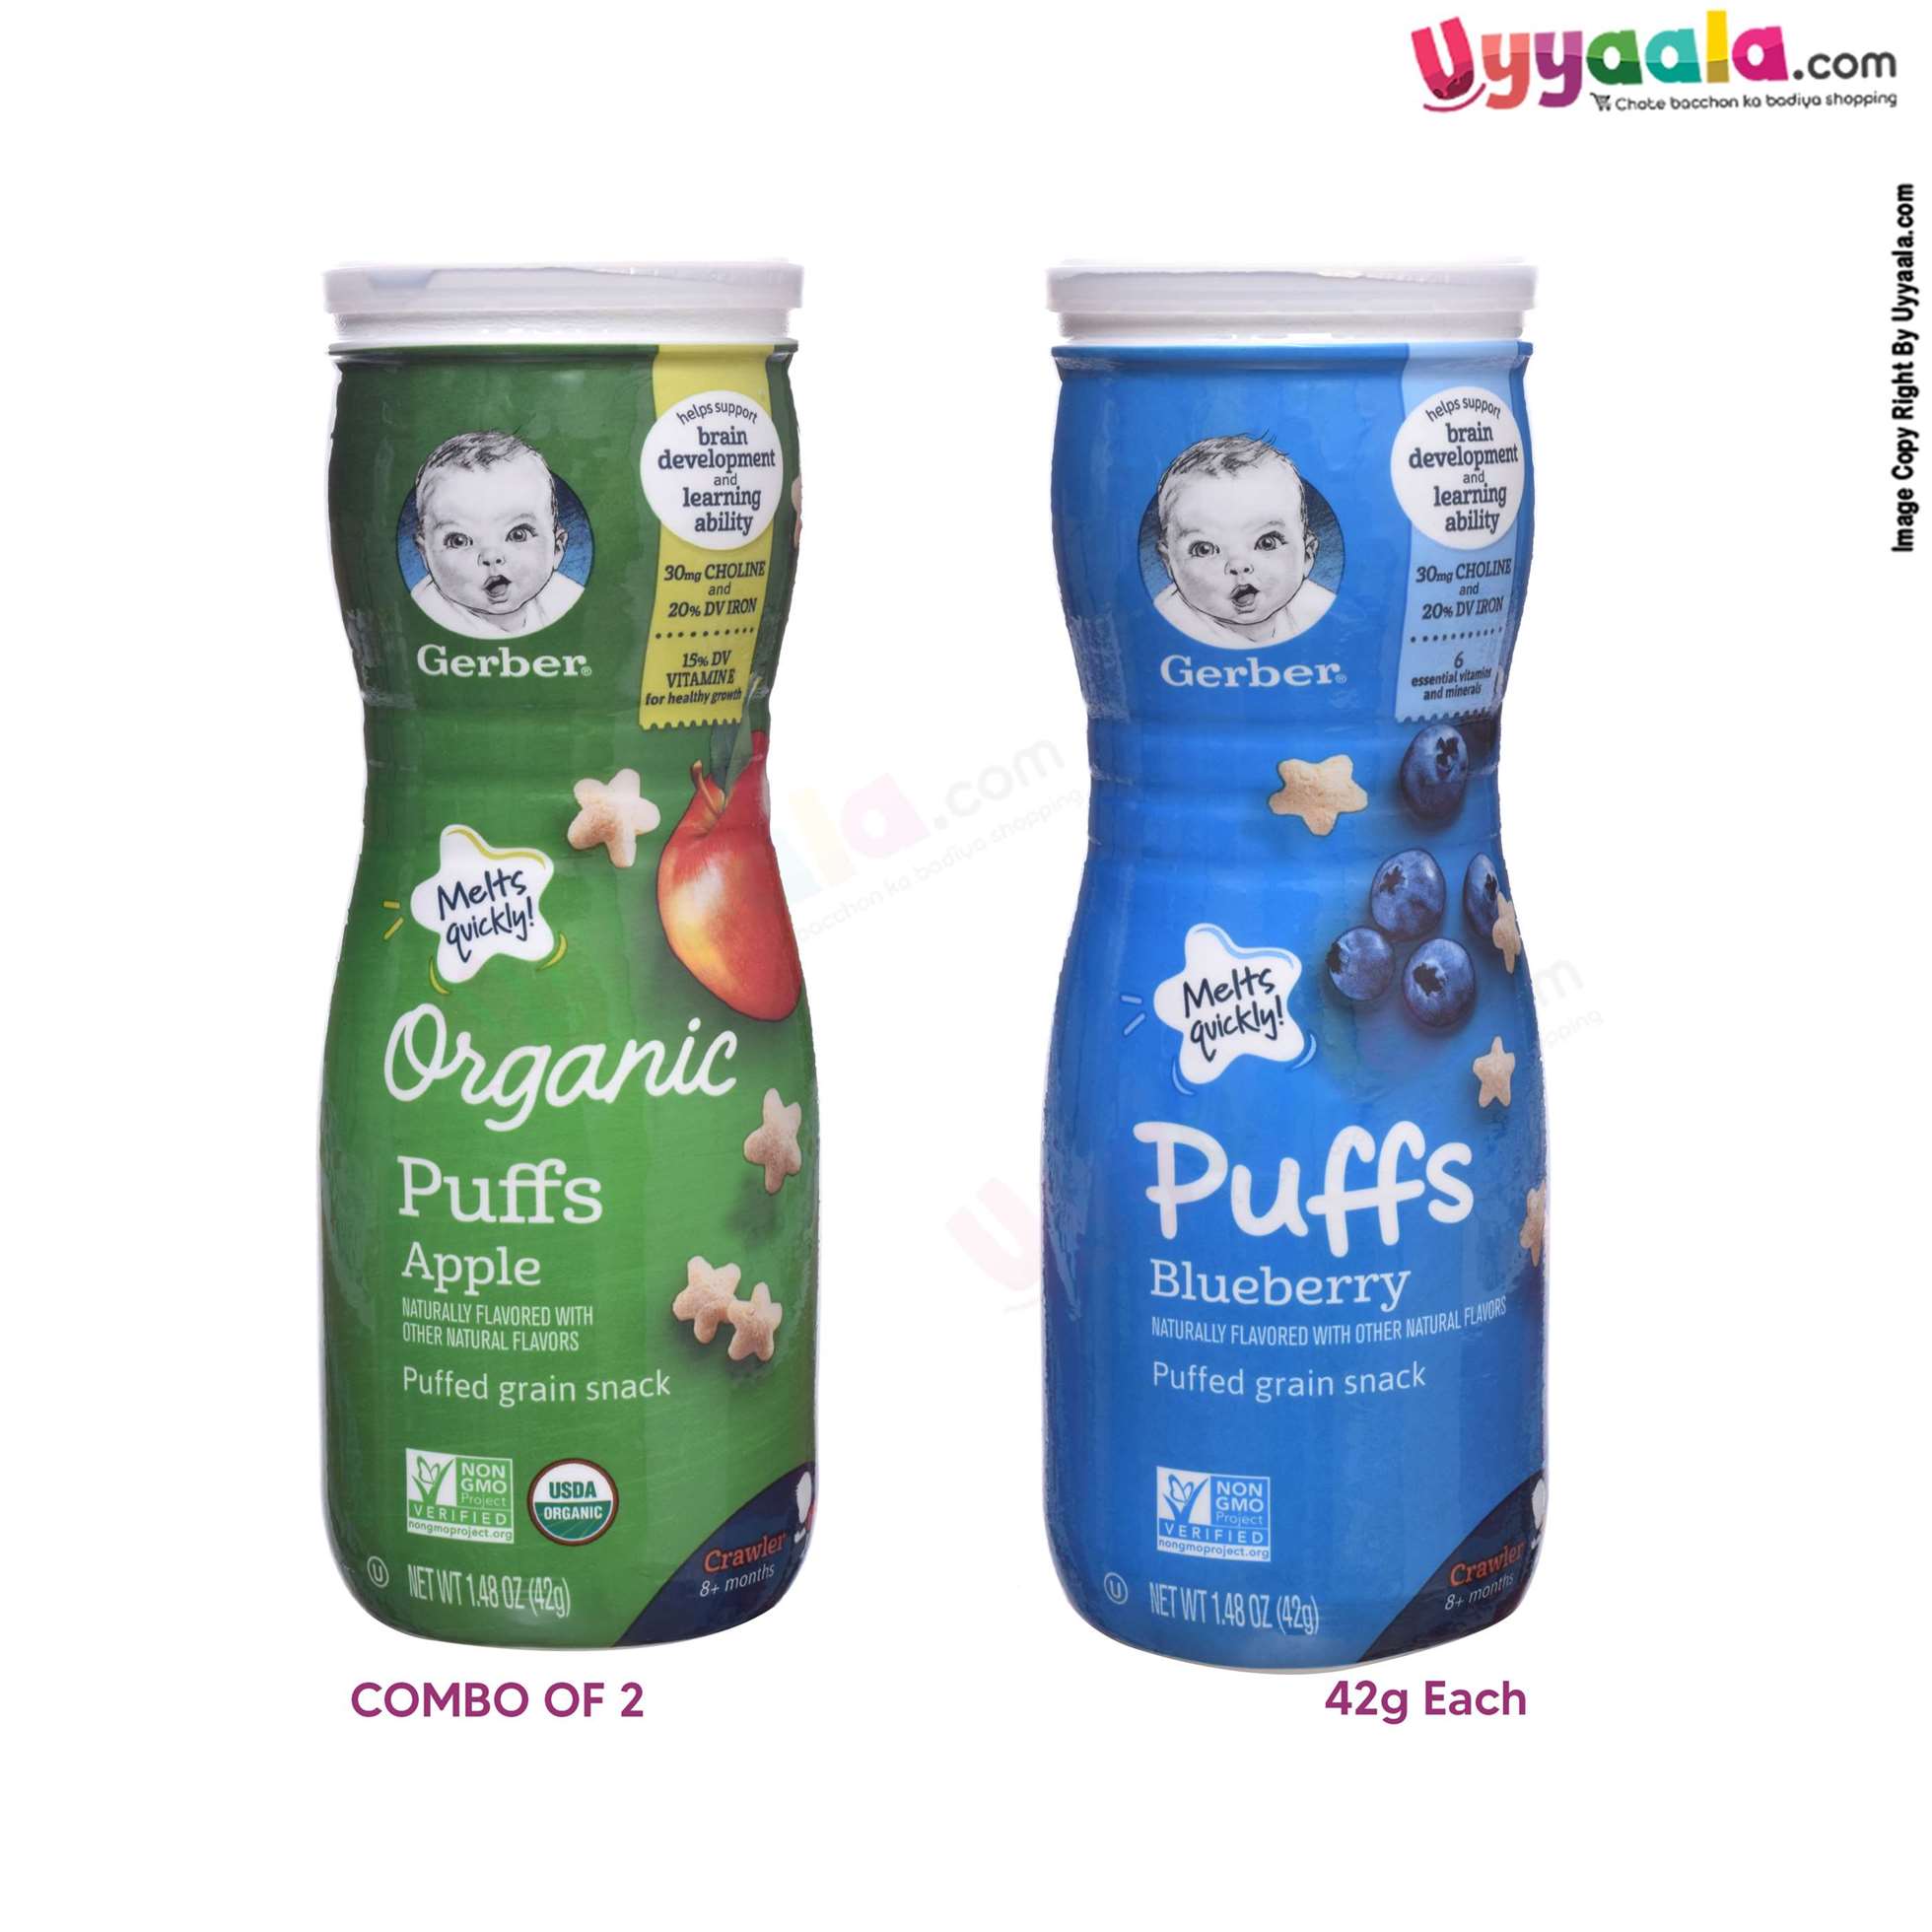 GERBER Puffs - blueberry & organic apple, naturally flavored baby snack, combo of 2 (42g each) - 8 months +